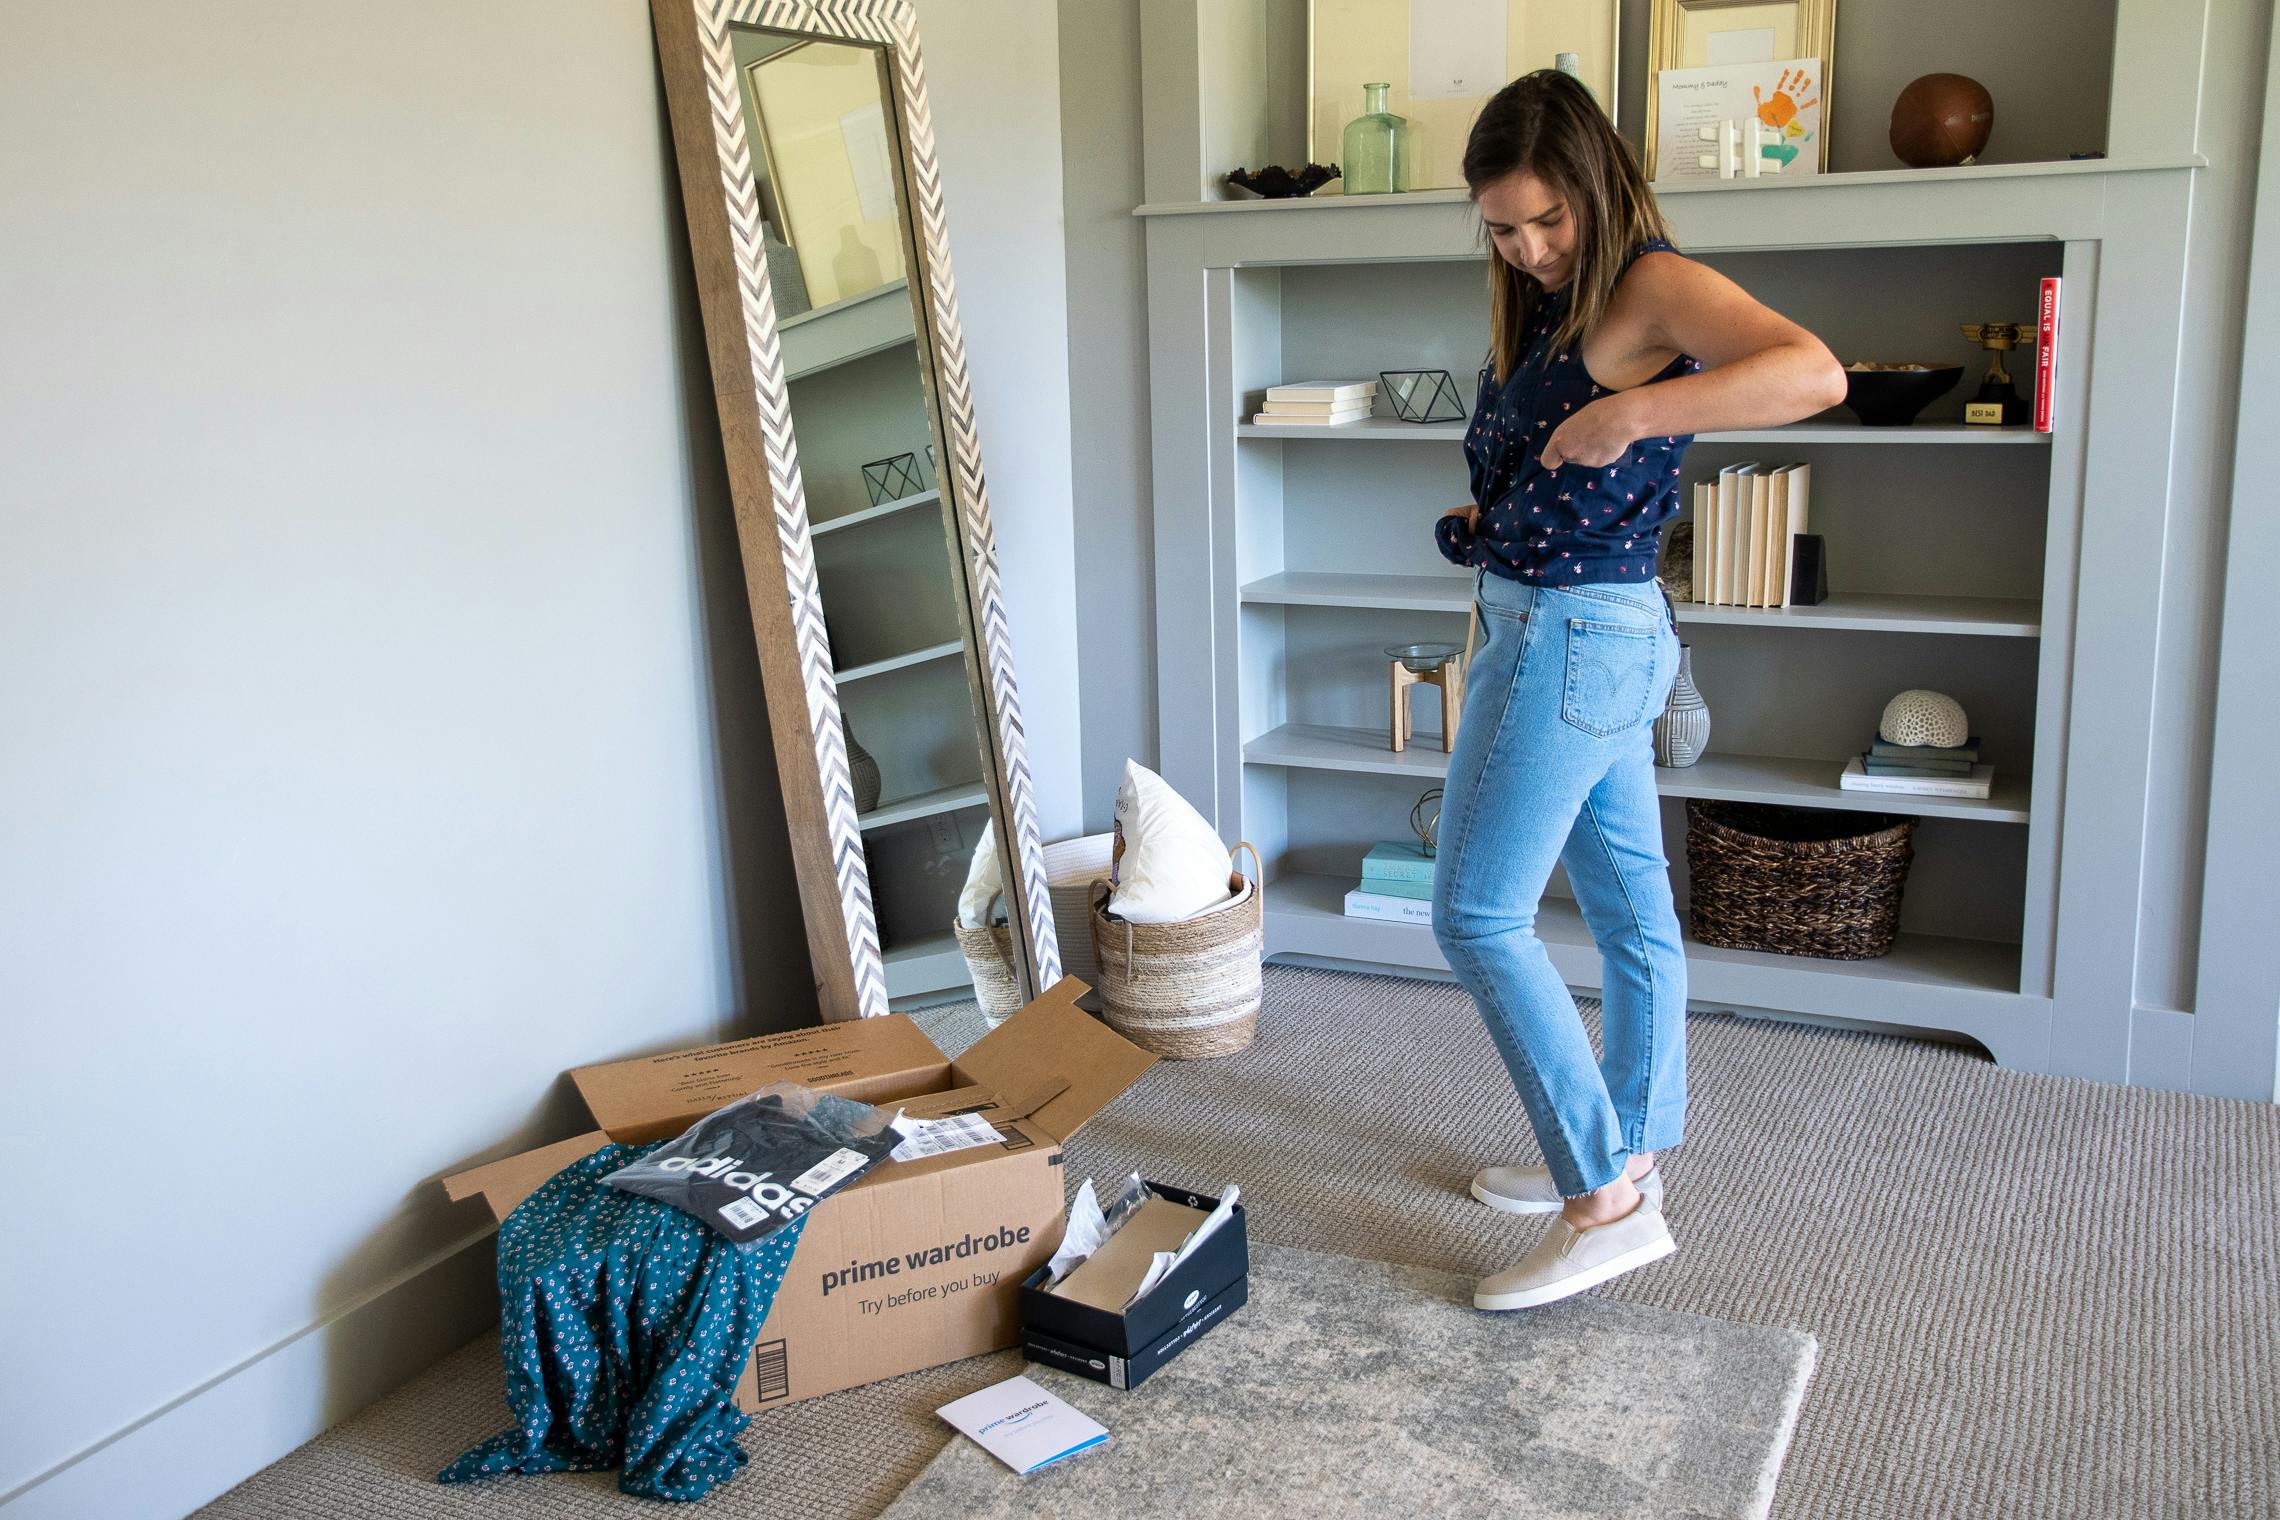 A woman trying on clothes in her home with an amazon prime wardrobe box near by